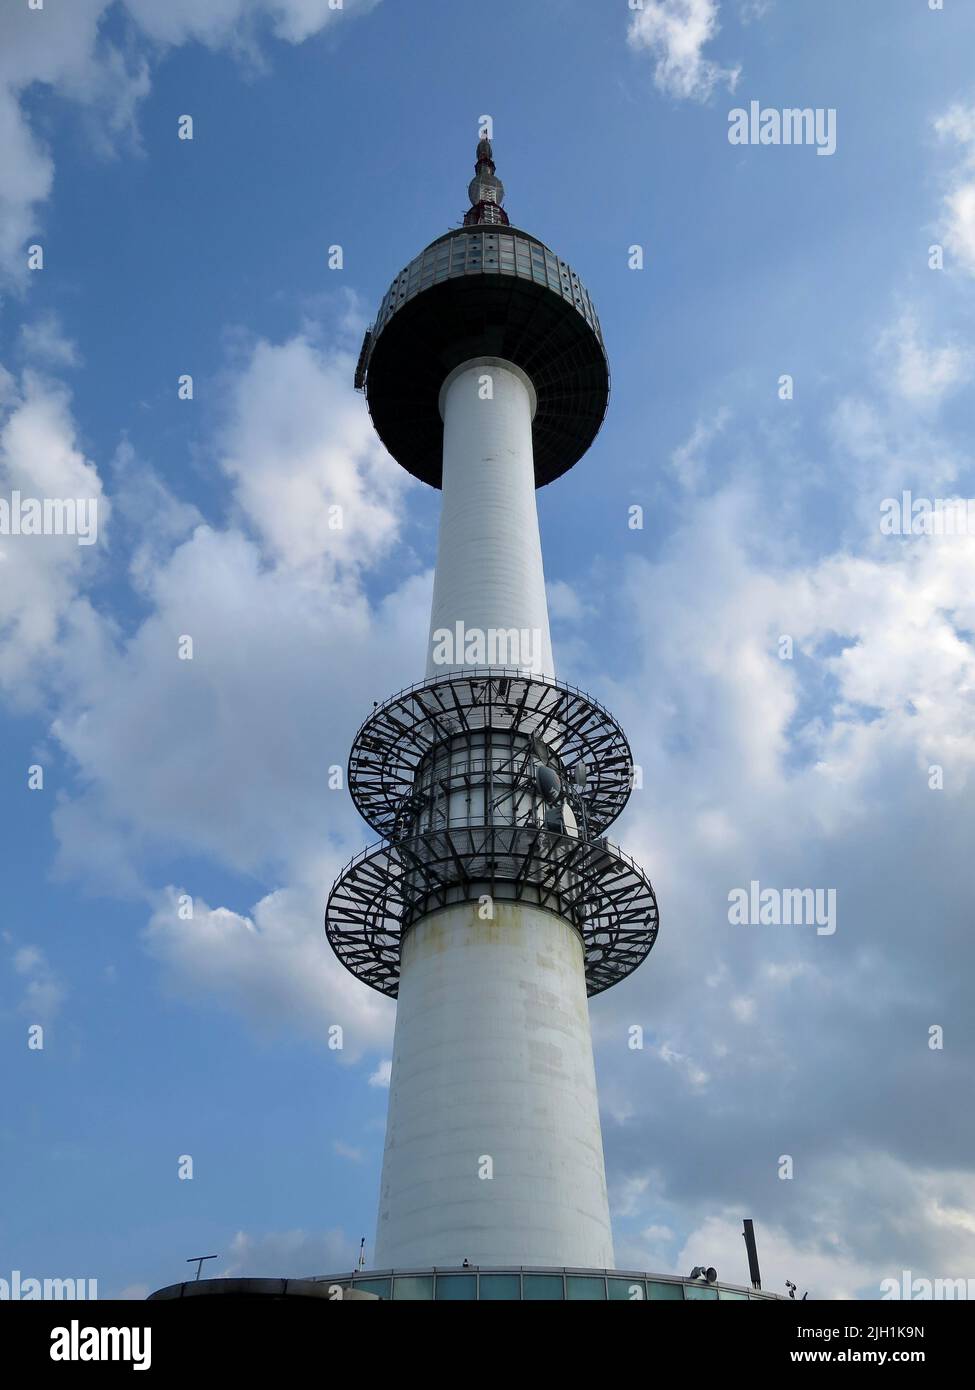 A low angle view of Namsan Tower in Seul South Korea with a blue cloudy sky in the background Stock Photo